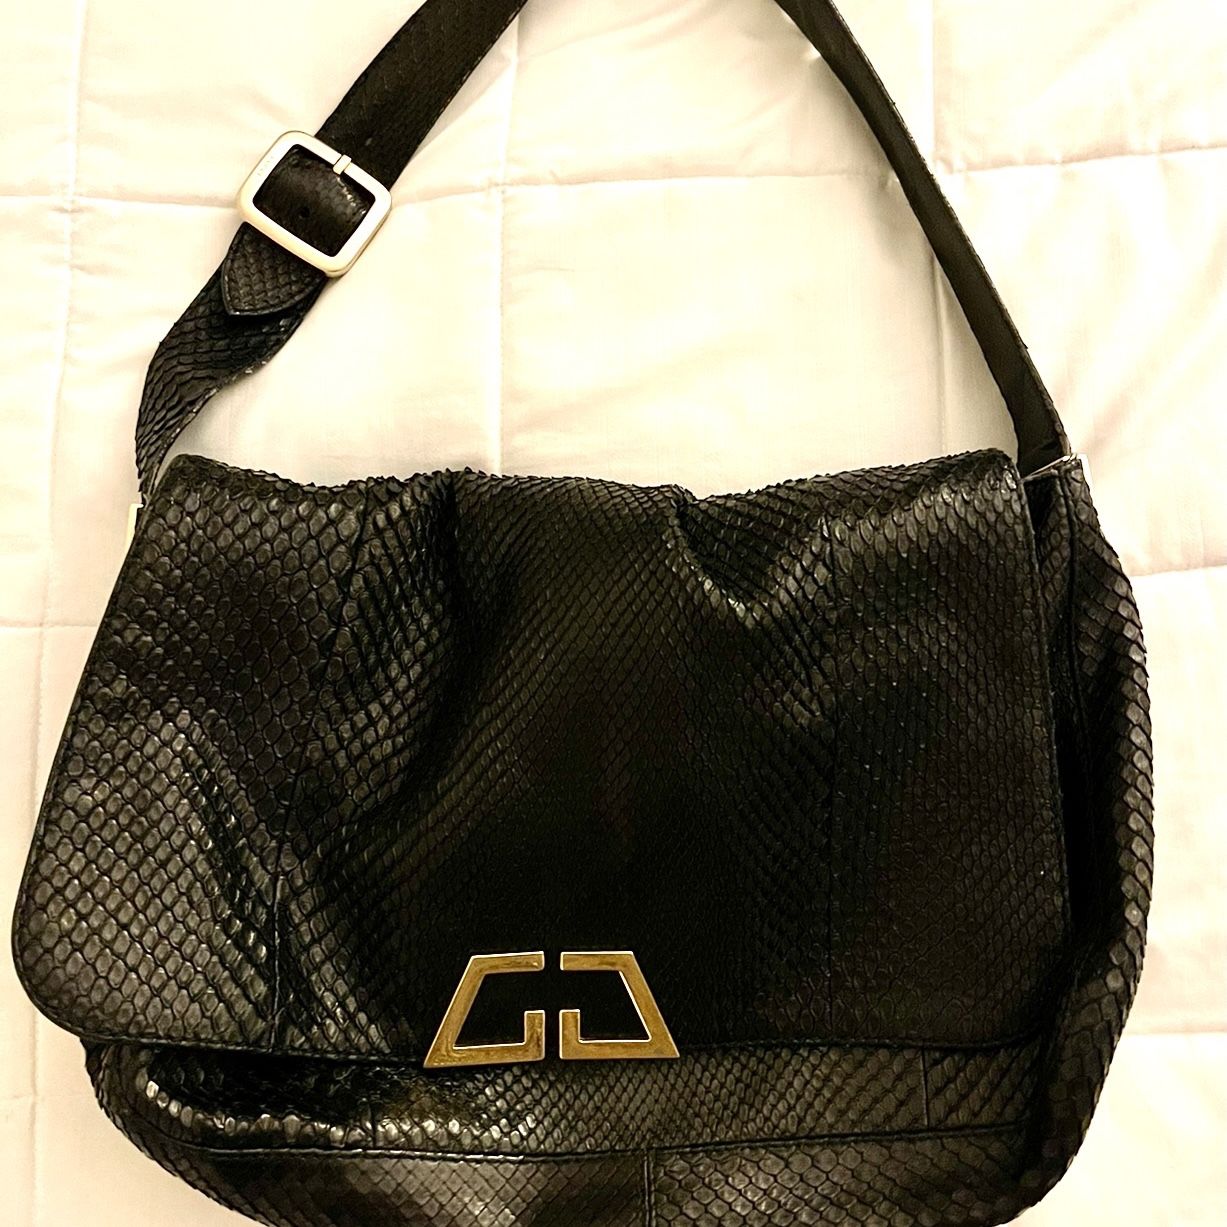 Gucci Handbag - Rare Leather Tote - One Owner 